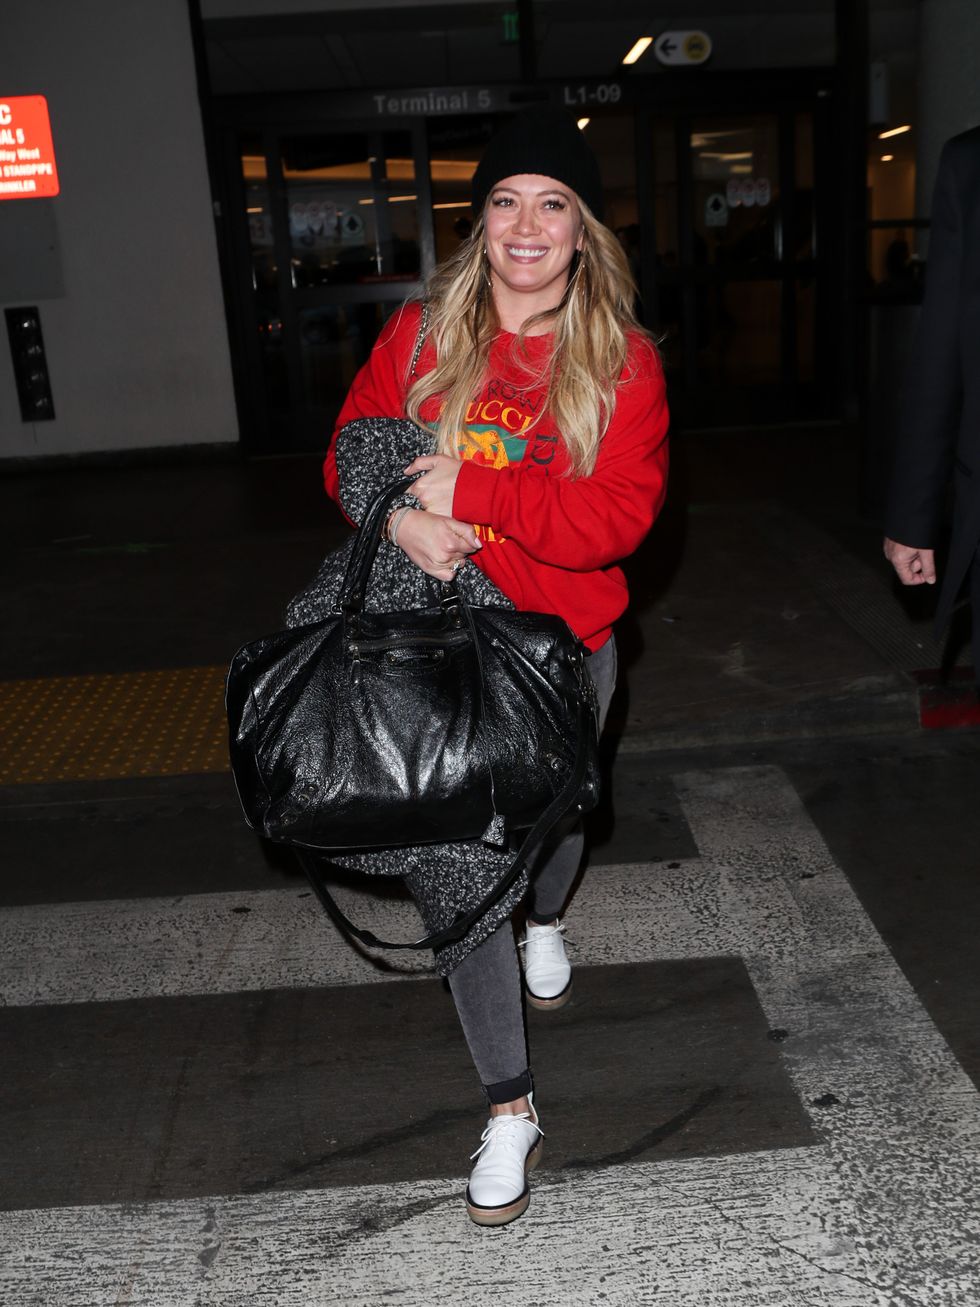 Jetsetting Celebs at Airports